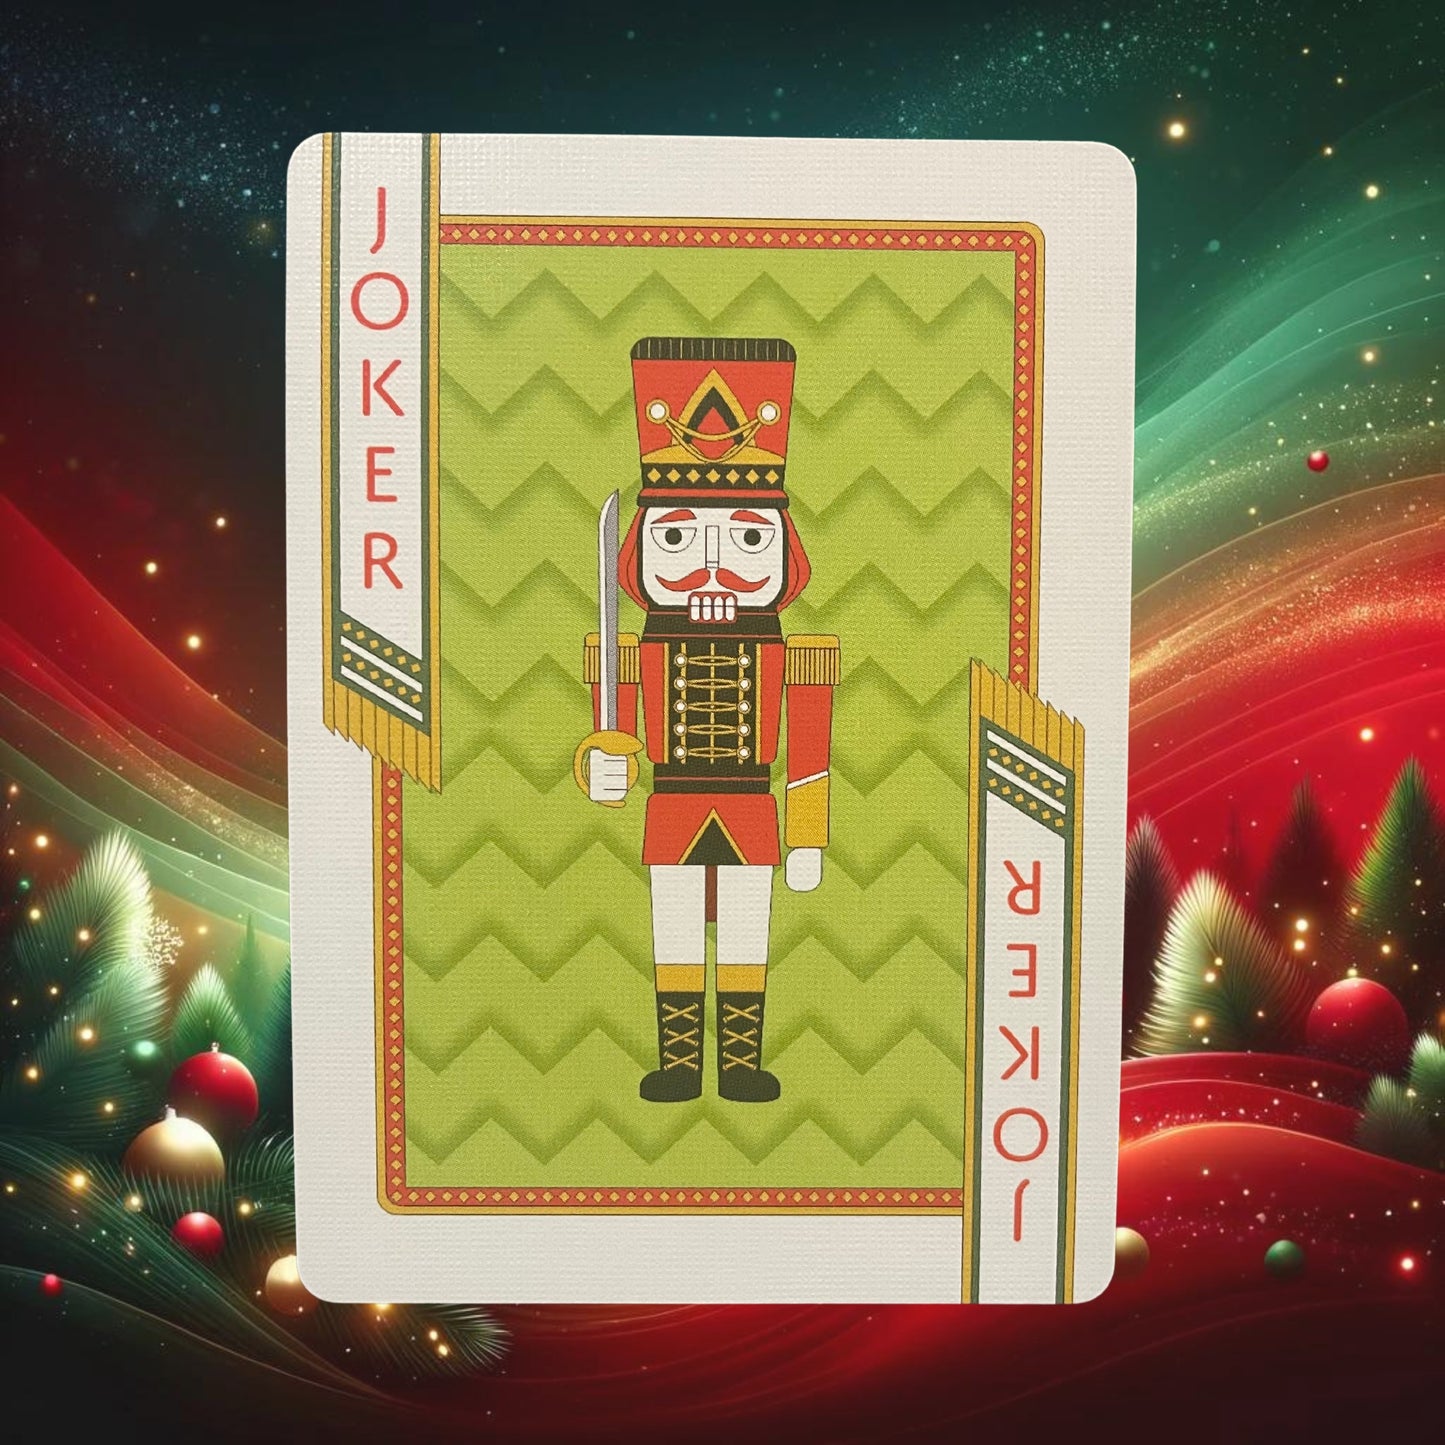 Gilded Nutcracker Bicycle Playing Cards